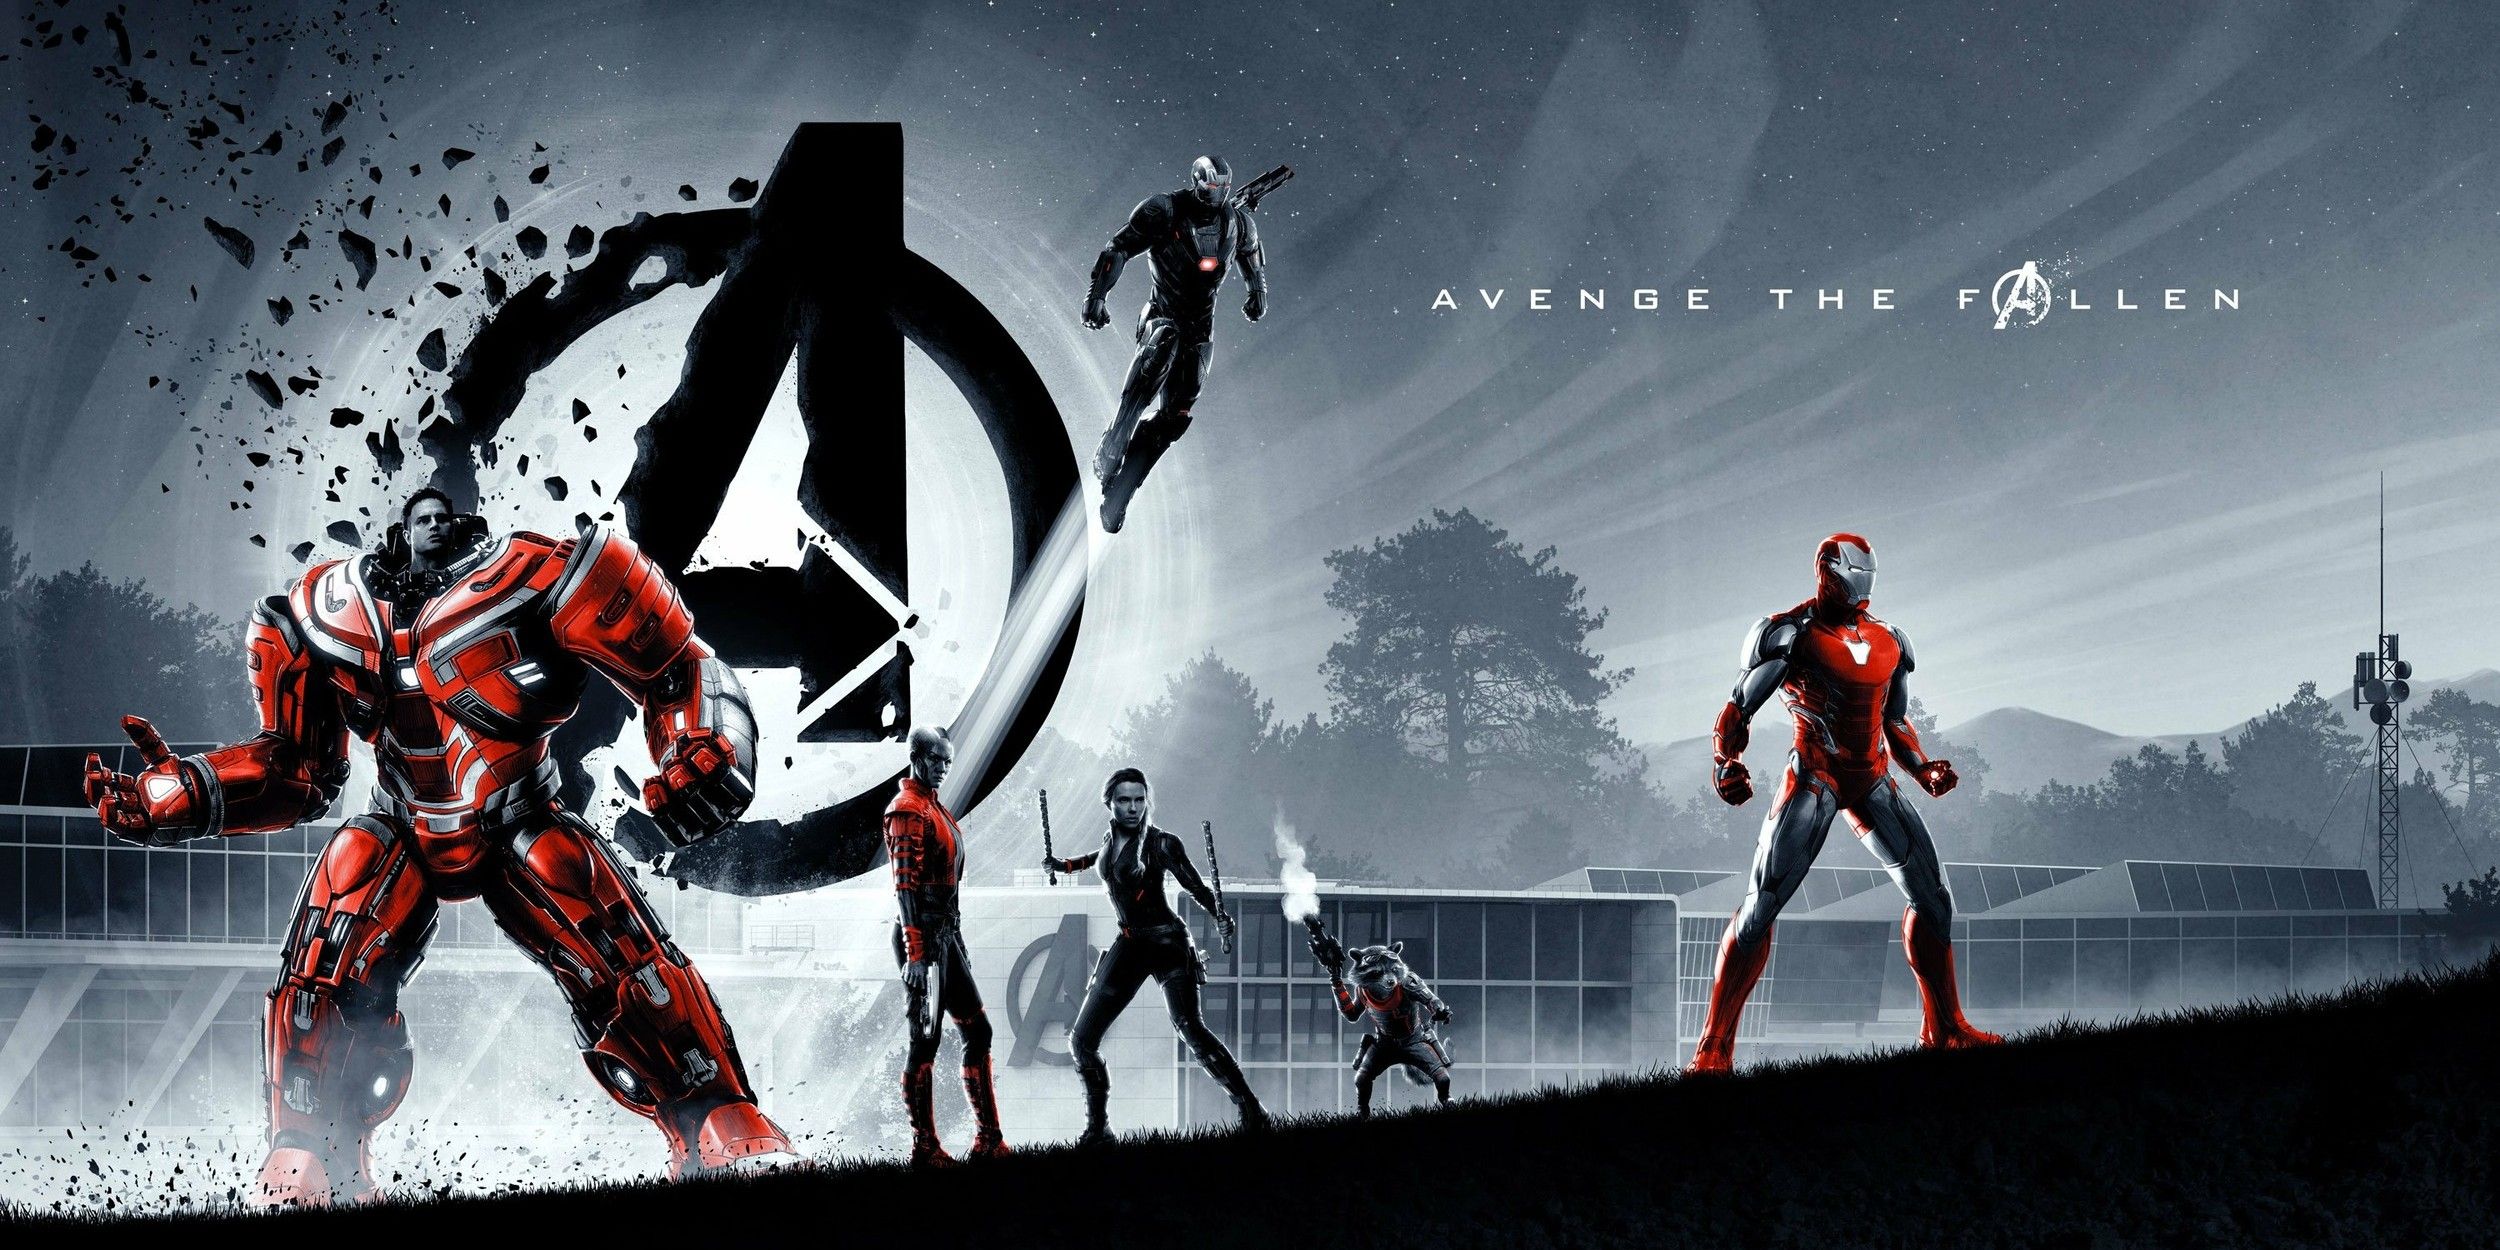 Avengers Endgame Banner with Black Widow and Rocket